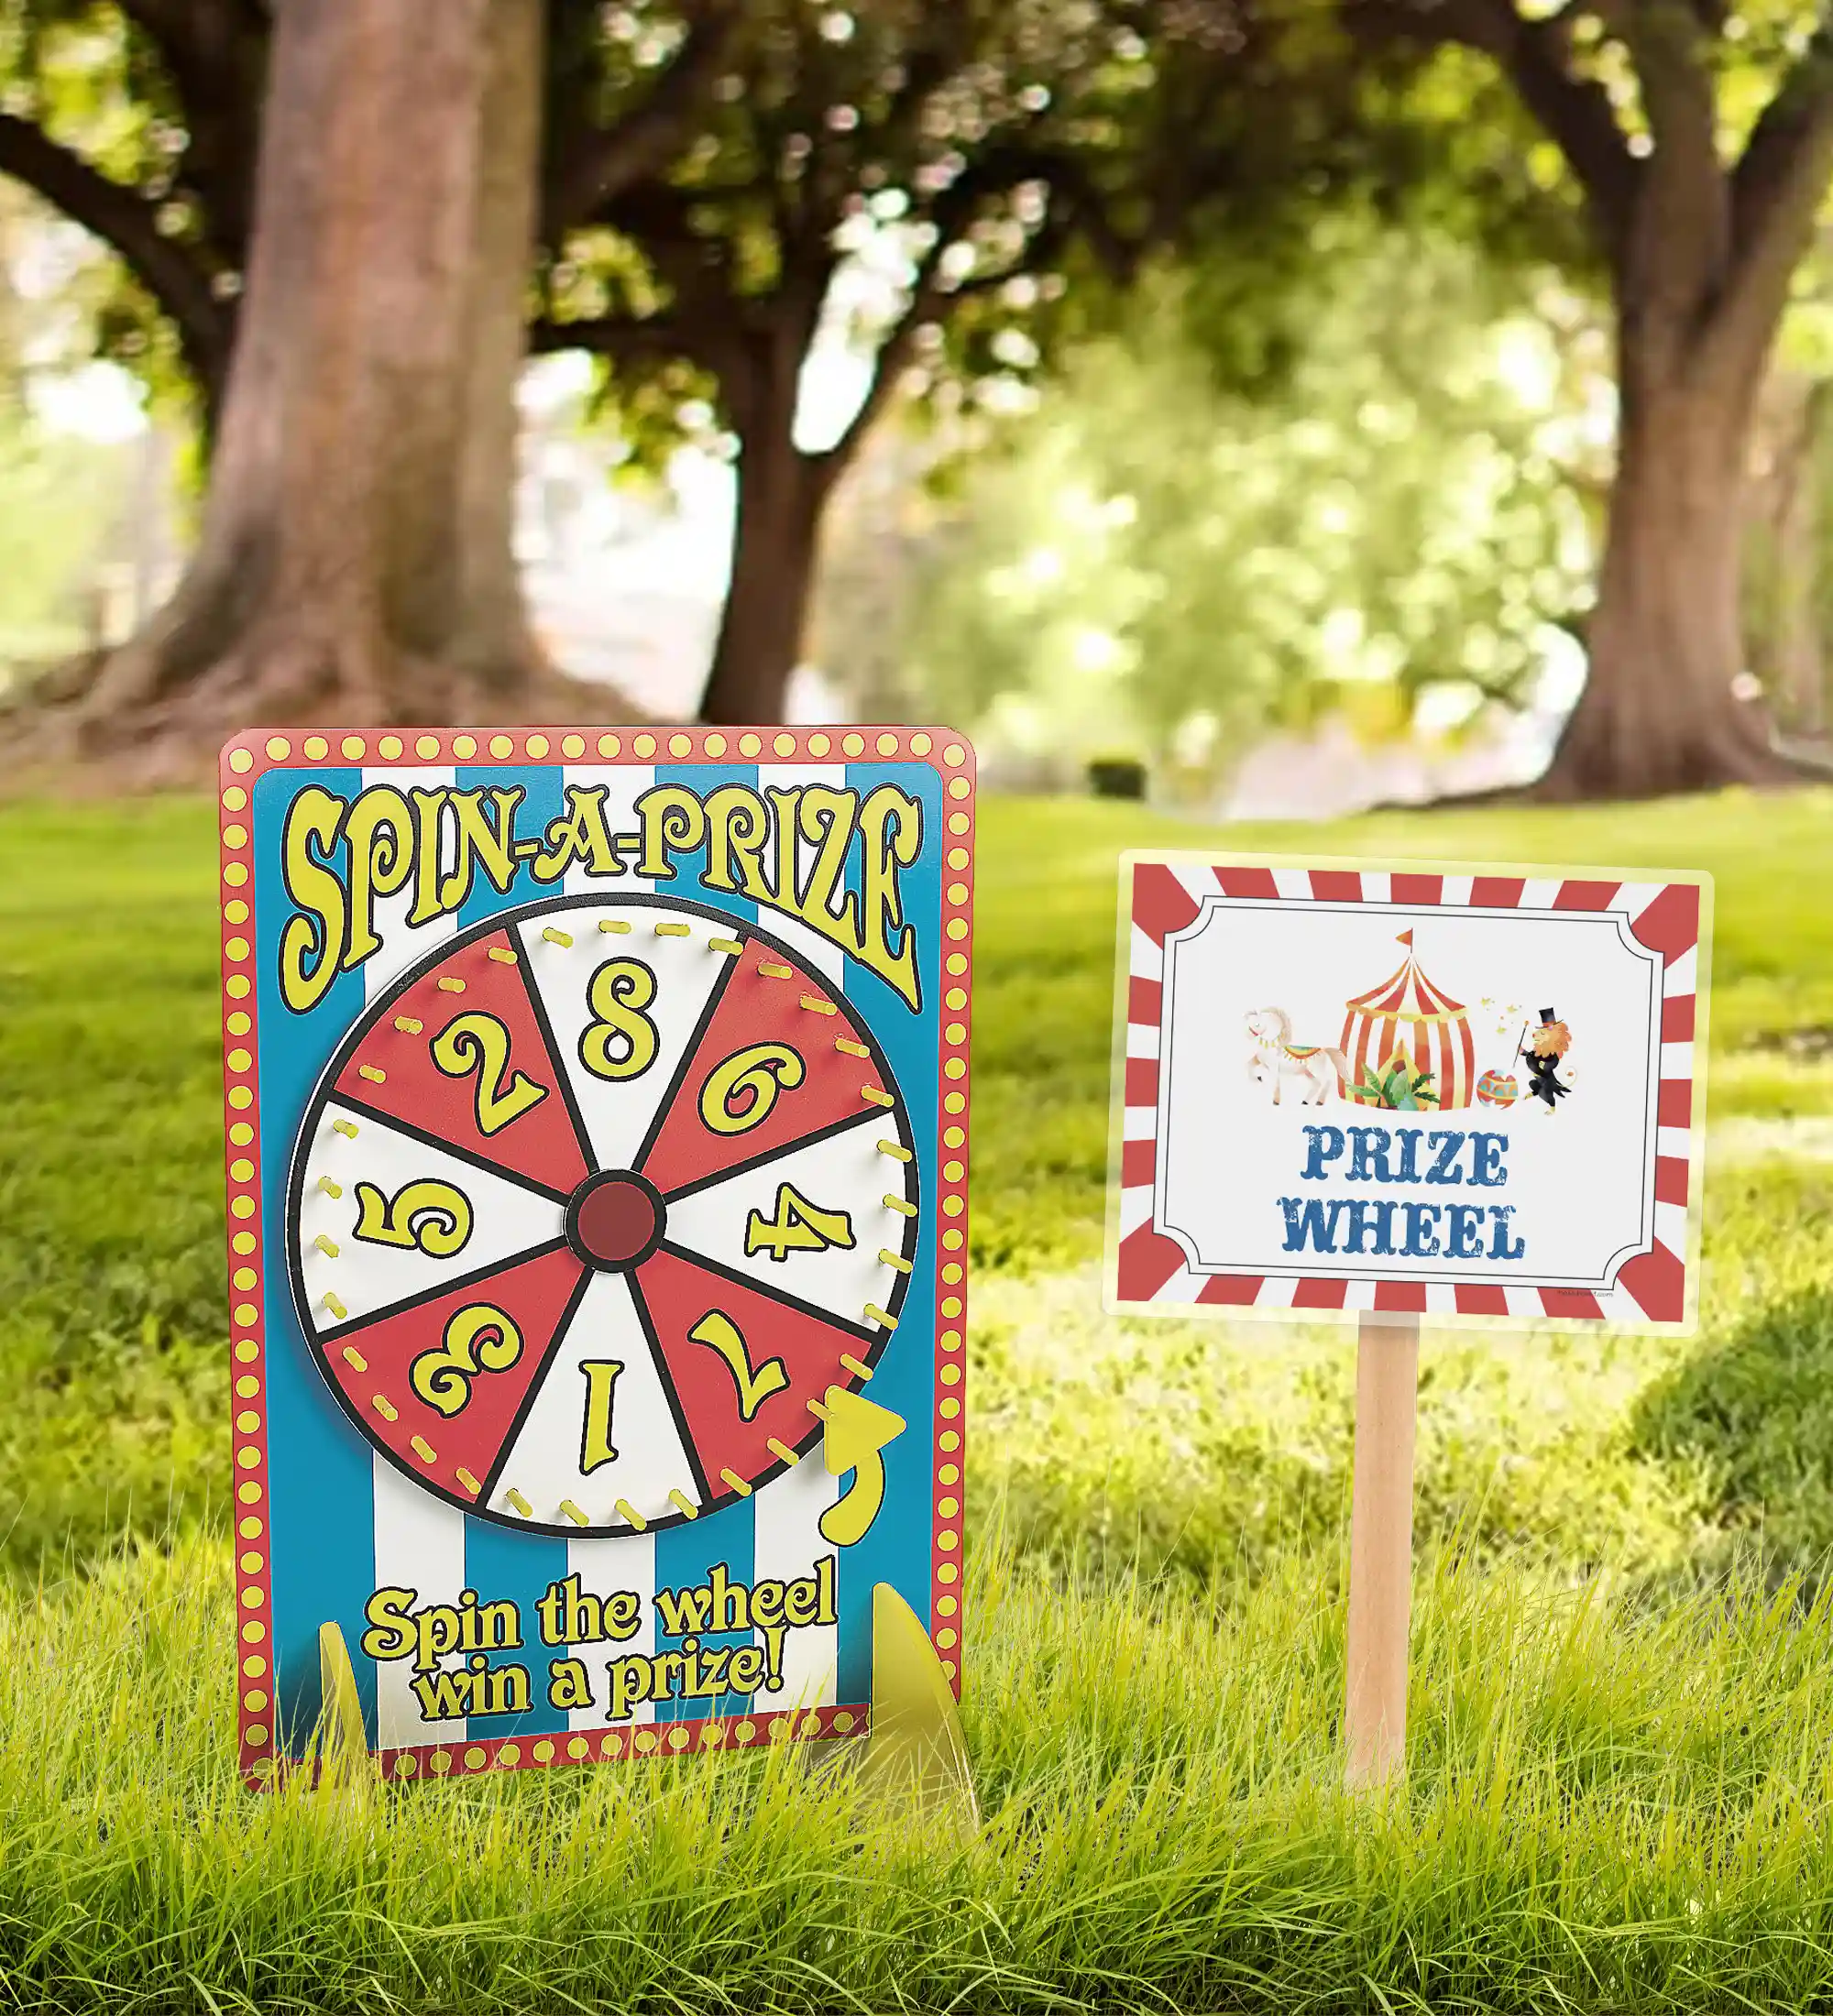 spin a prize carnival and circus game. Get our printable circus signs bundle to label each station and booth at your circus party or school carnival.